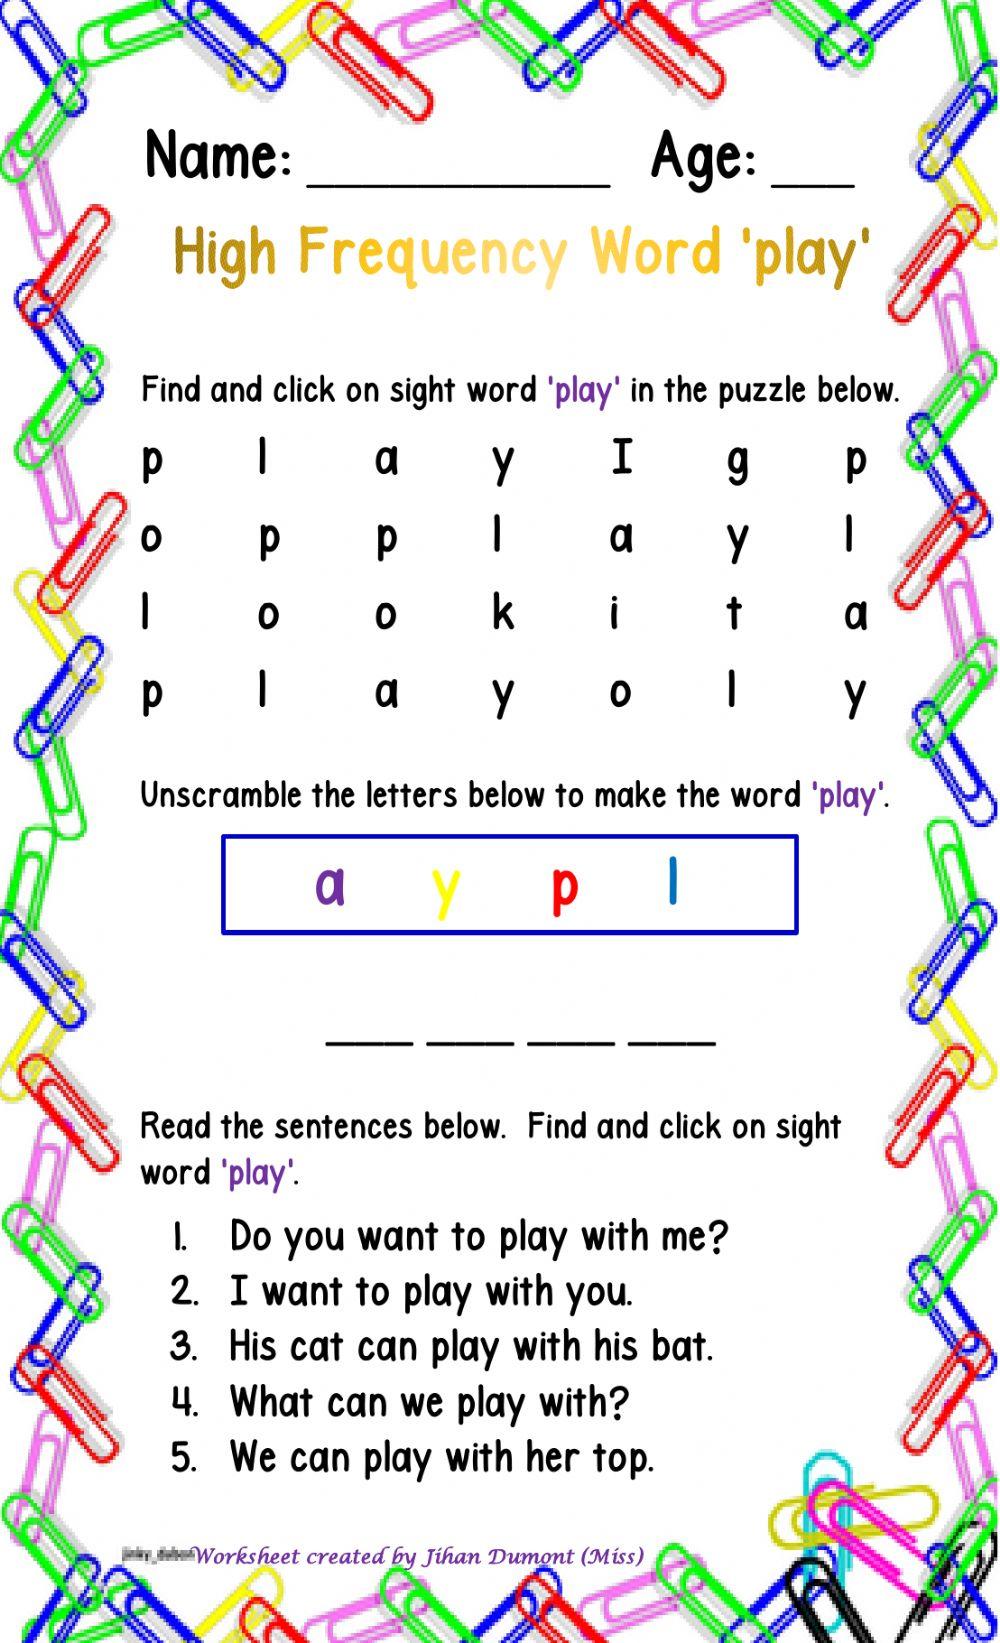 High Frequency word 'play'